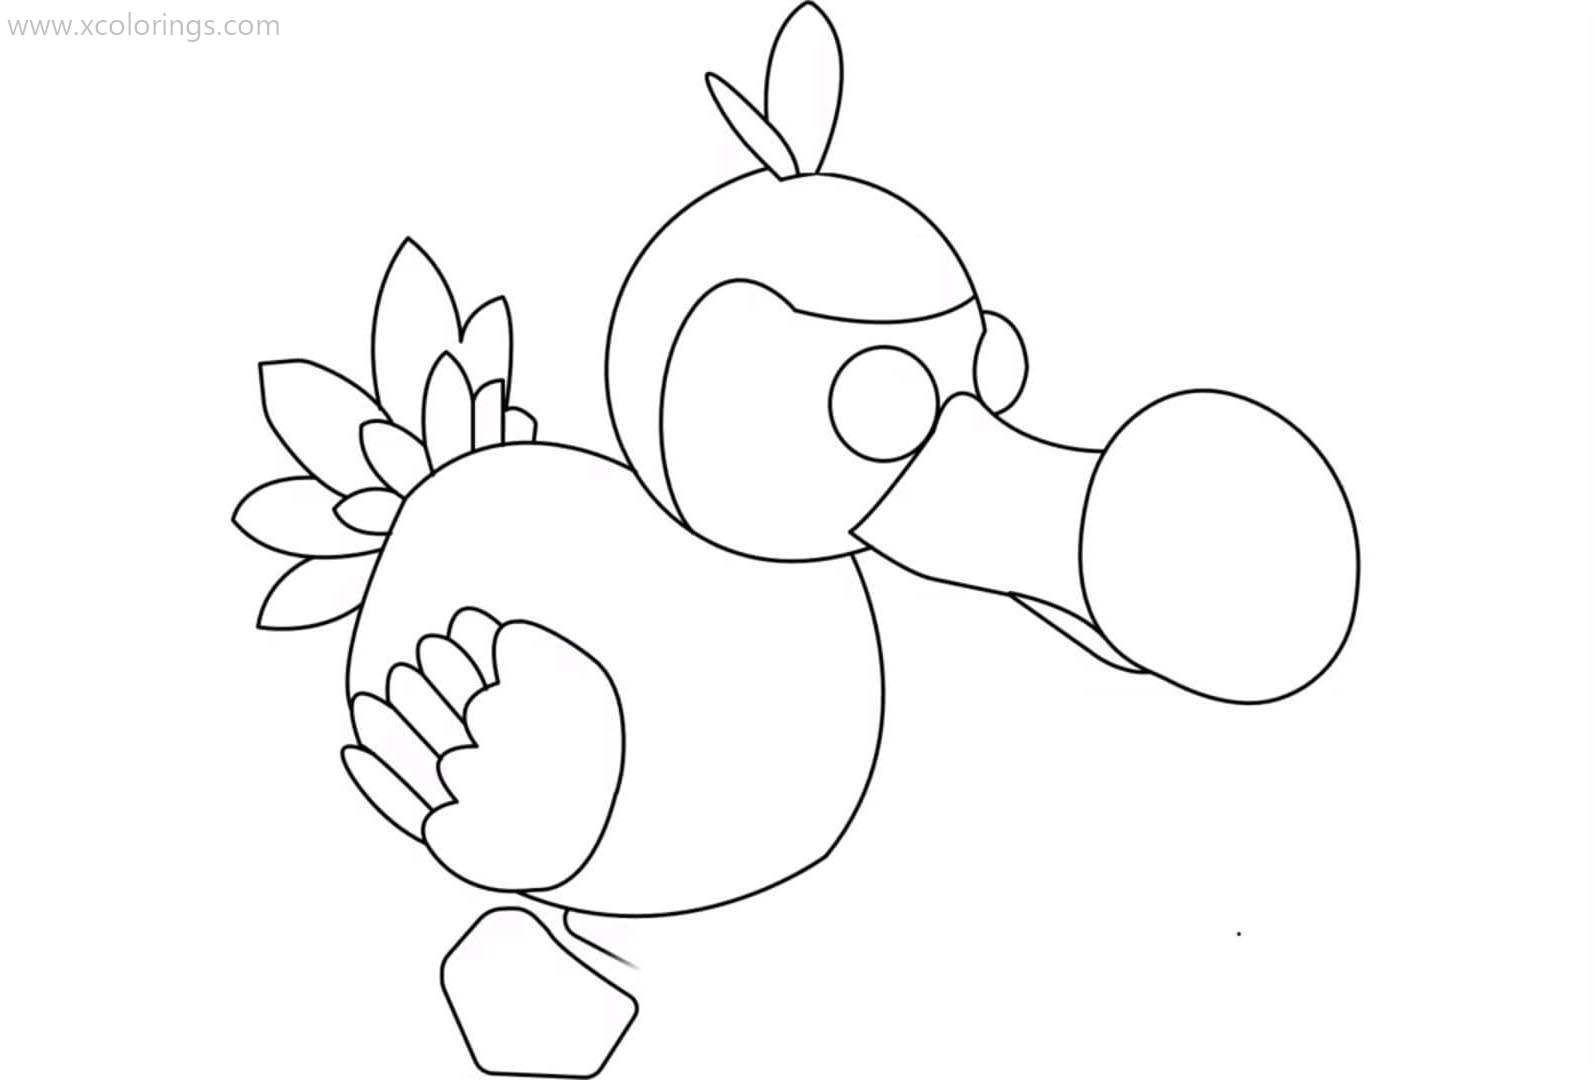 Roblox Adopt Me Coloring Pages Dodo. | Pets drawing, Pokemon coloring pages,  Coloring pages